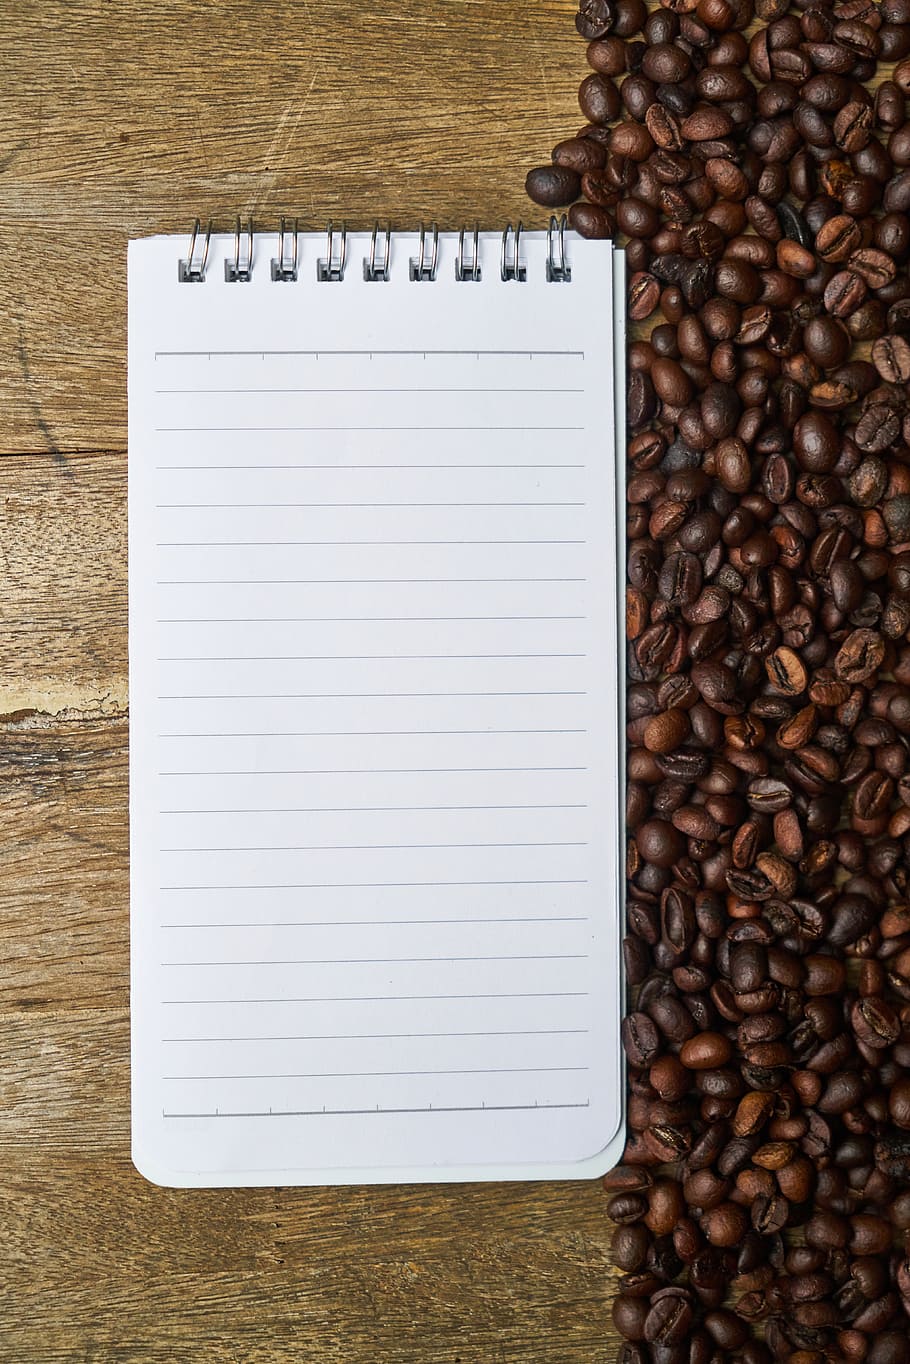 white ruled paper beside coffee beans, core, background, food